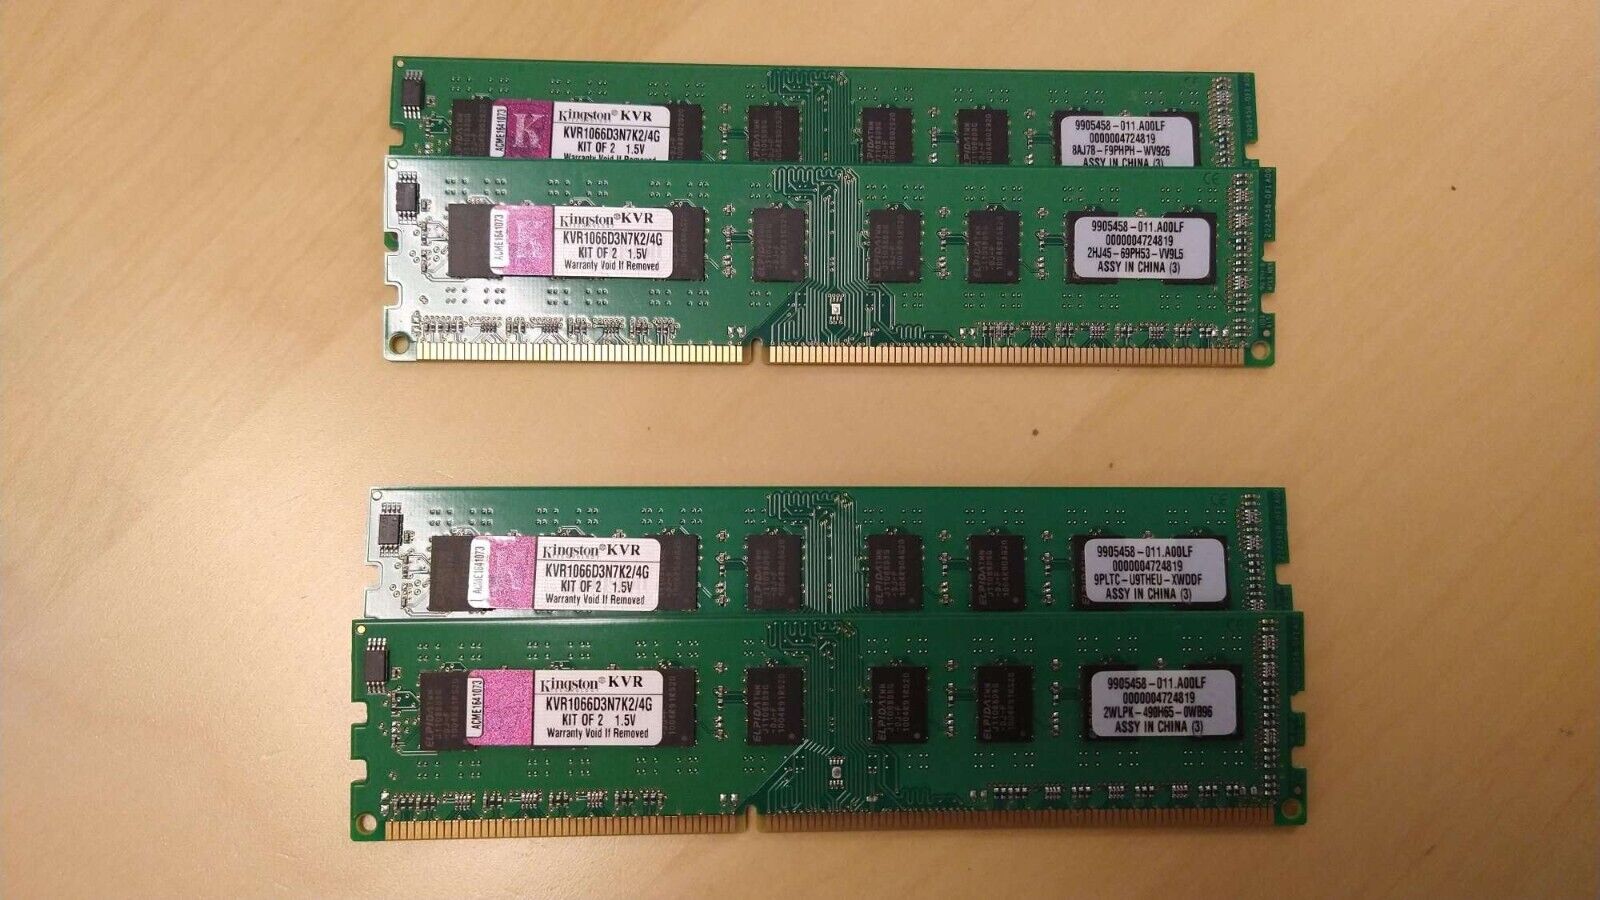 KVR1066D3N7K2/4G Kingston 4GB Kit (2 X 2GB) PC3-8500 DDR3-1066MHz lot of 2